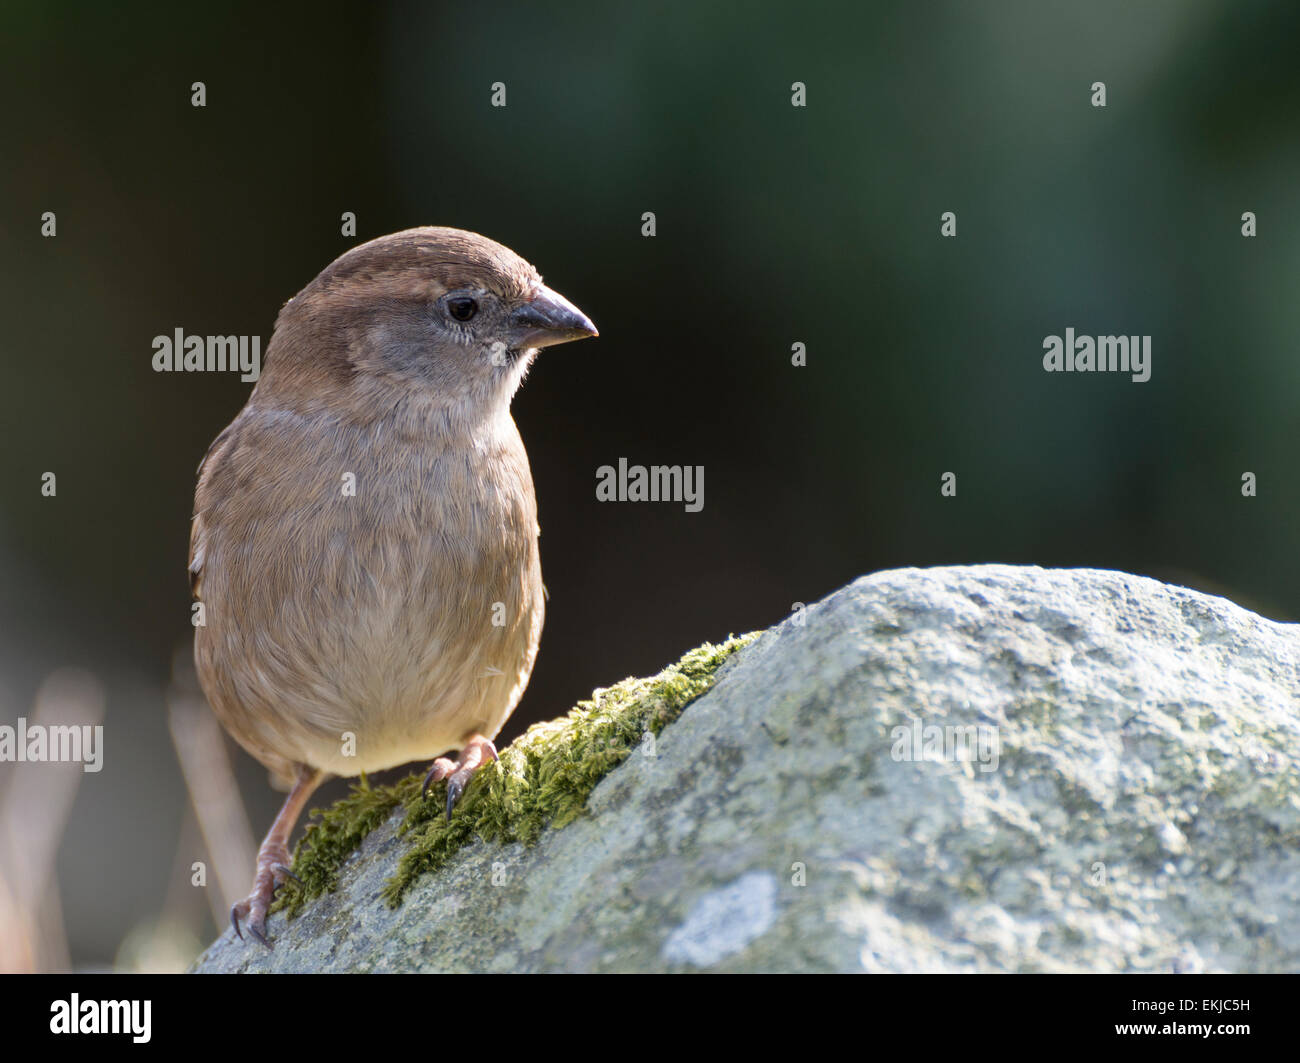 A female chaffinch on a stone wall lit by the low afternoon sun in Borrowdale, England Stock Photo